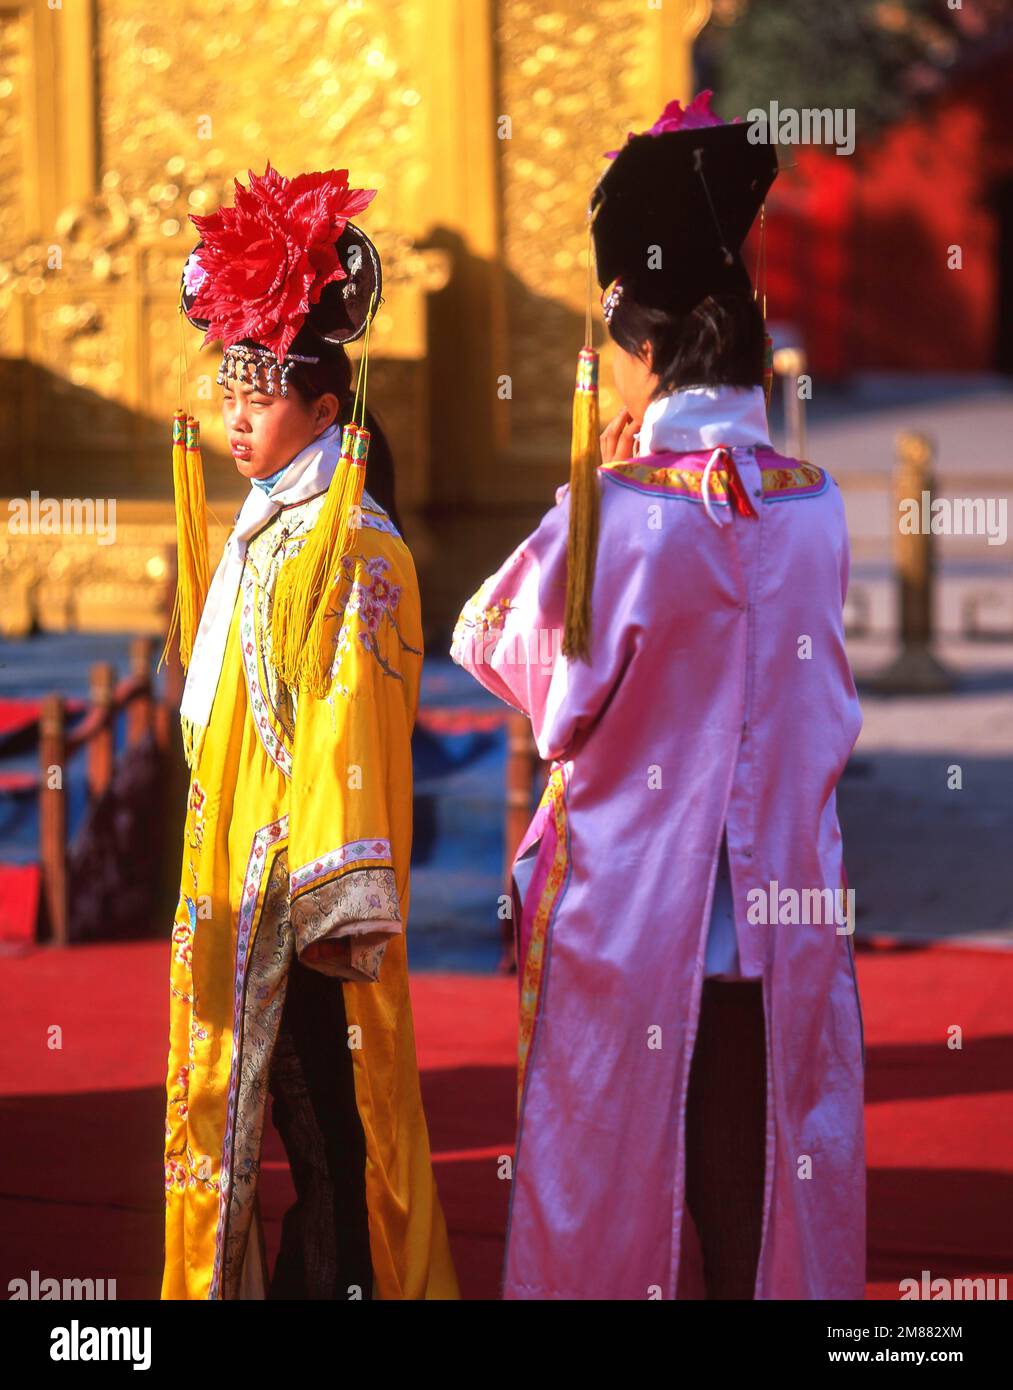 Tourists dressed in Imperial costume, The Forbidden City (Zǐjìnchéng), Dongcheng, Beijing, The People's Republic of China Stock Photo